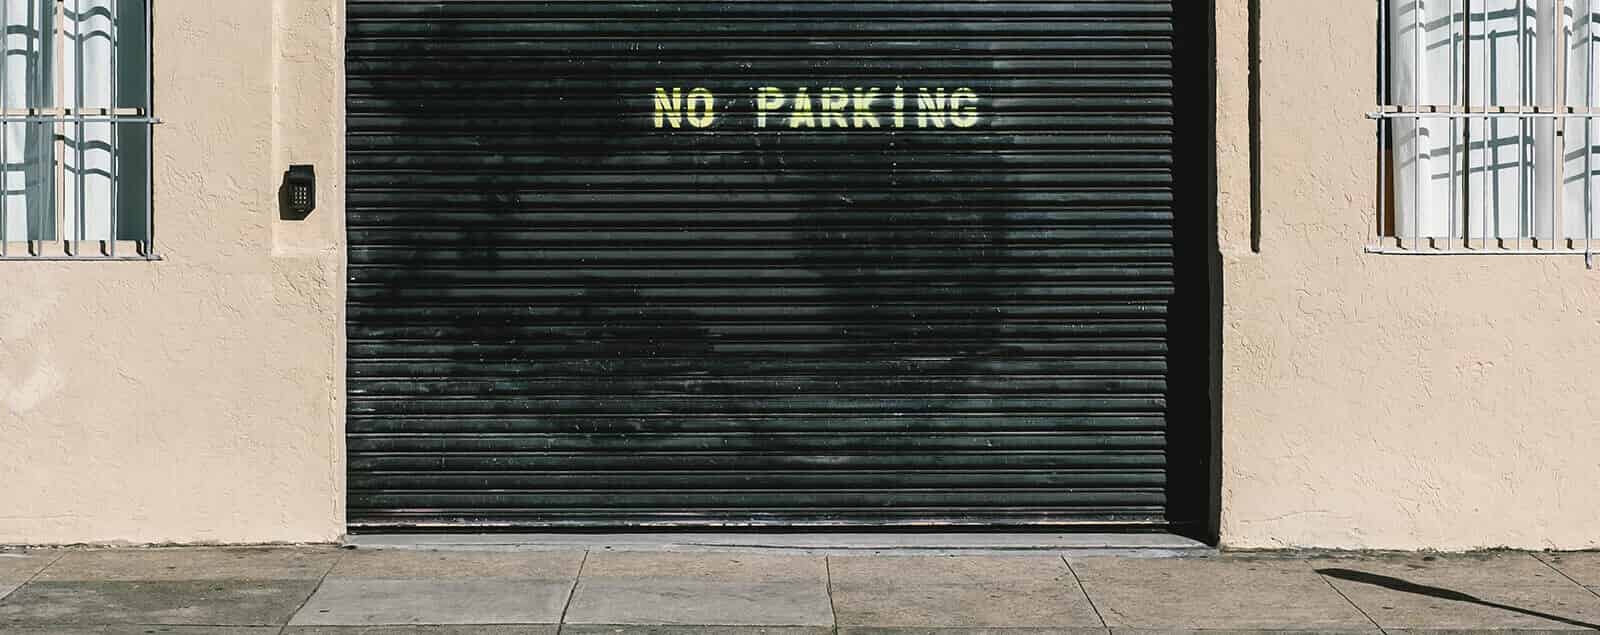 Building shutters with text no parking written